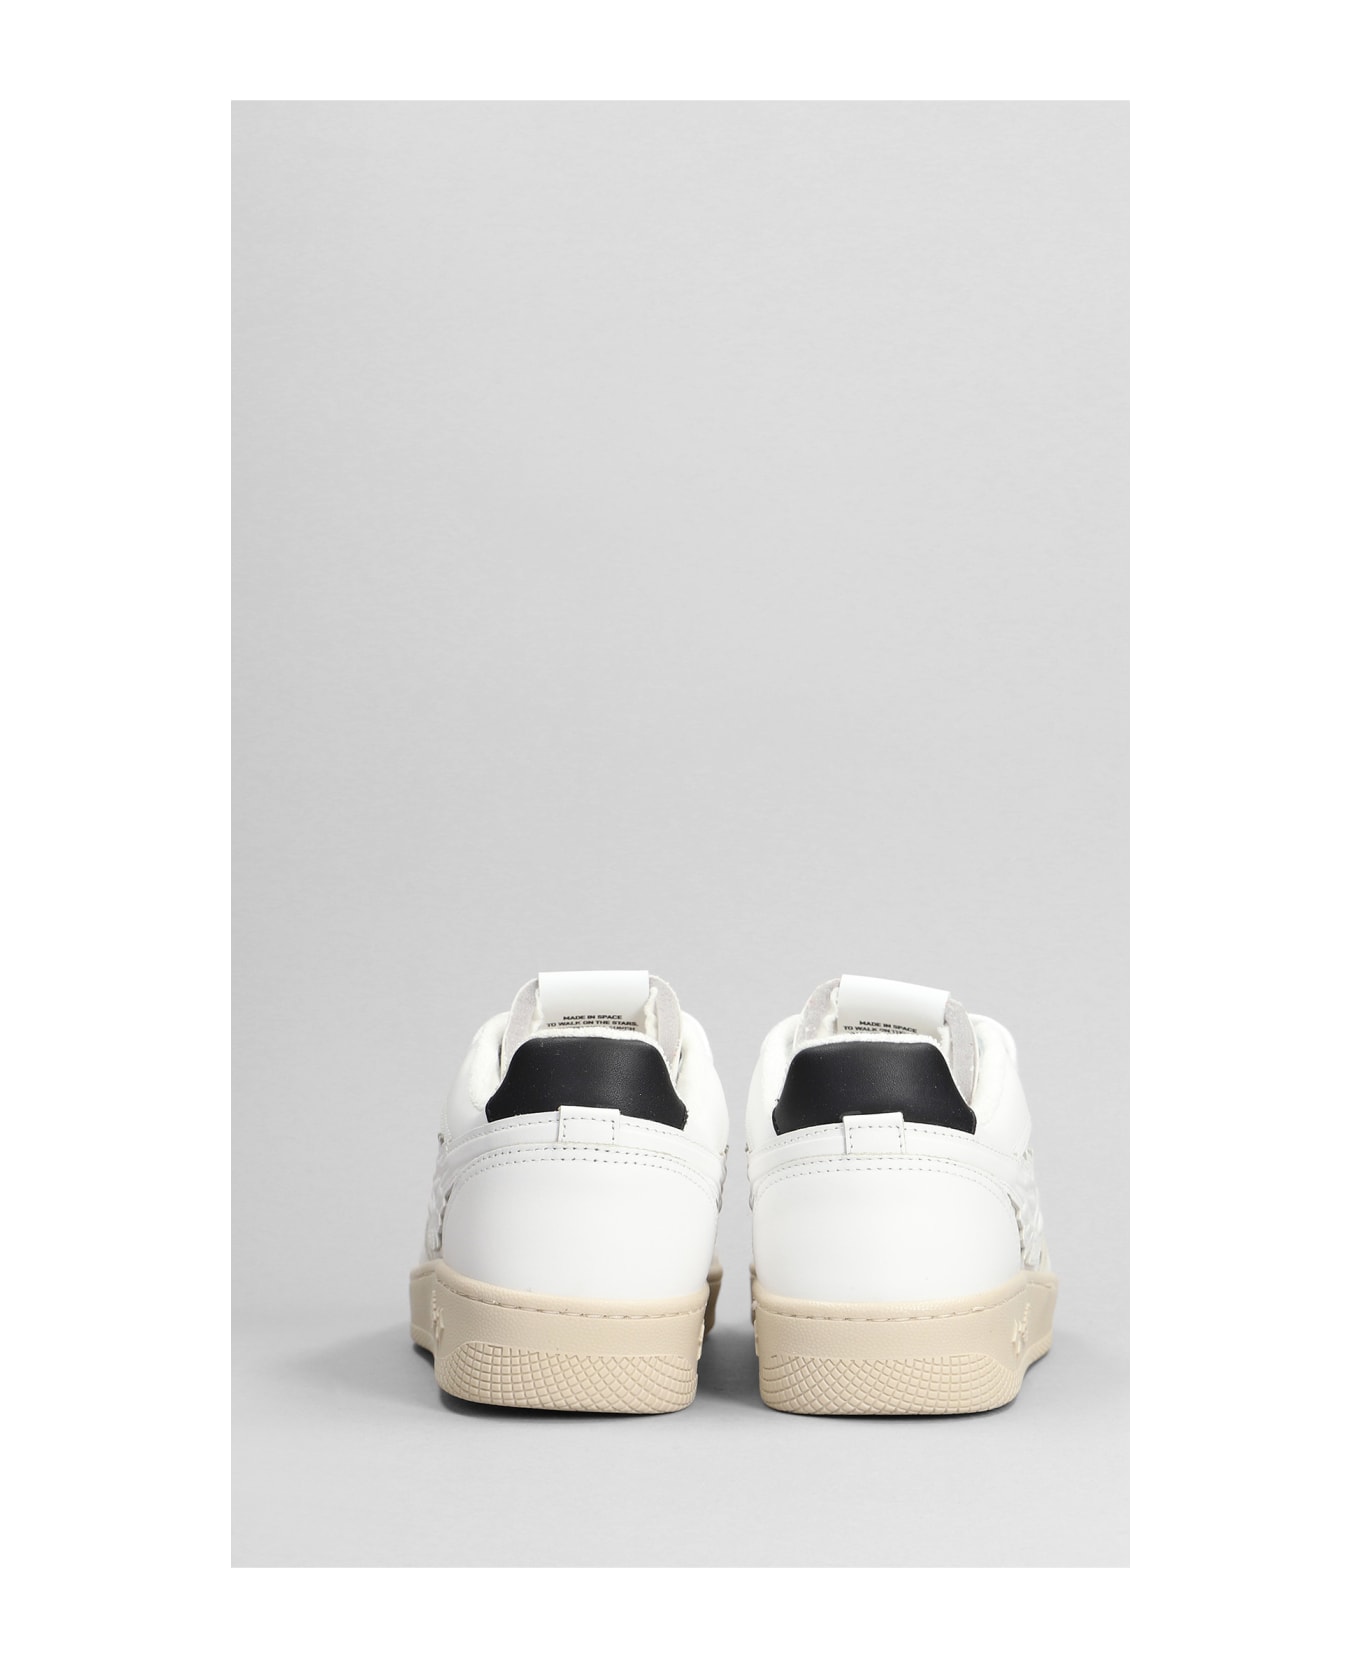 Enterprise Japan Sneakers In White Leather - White